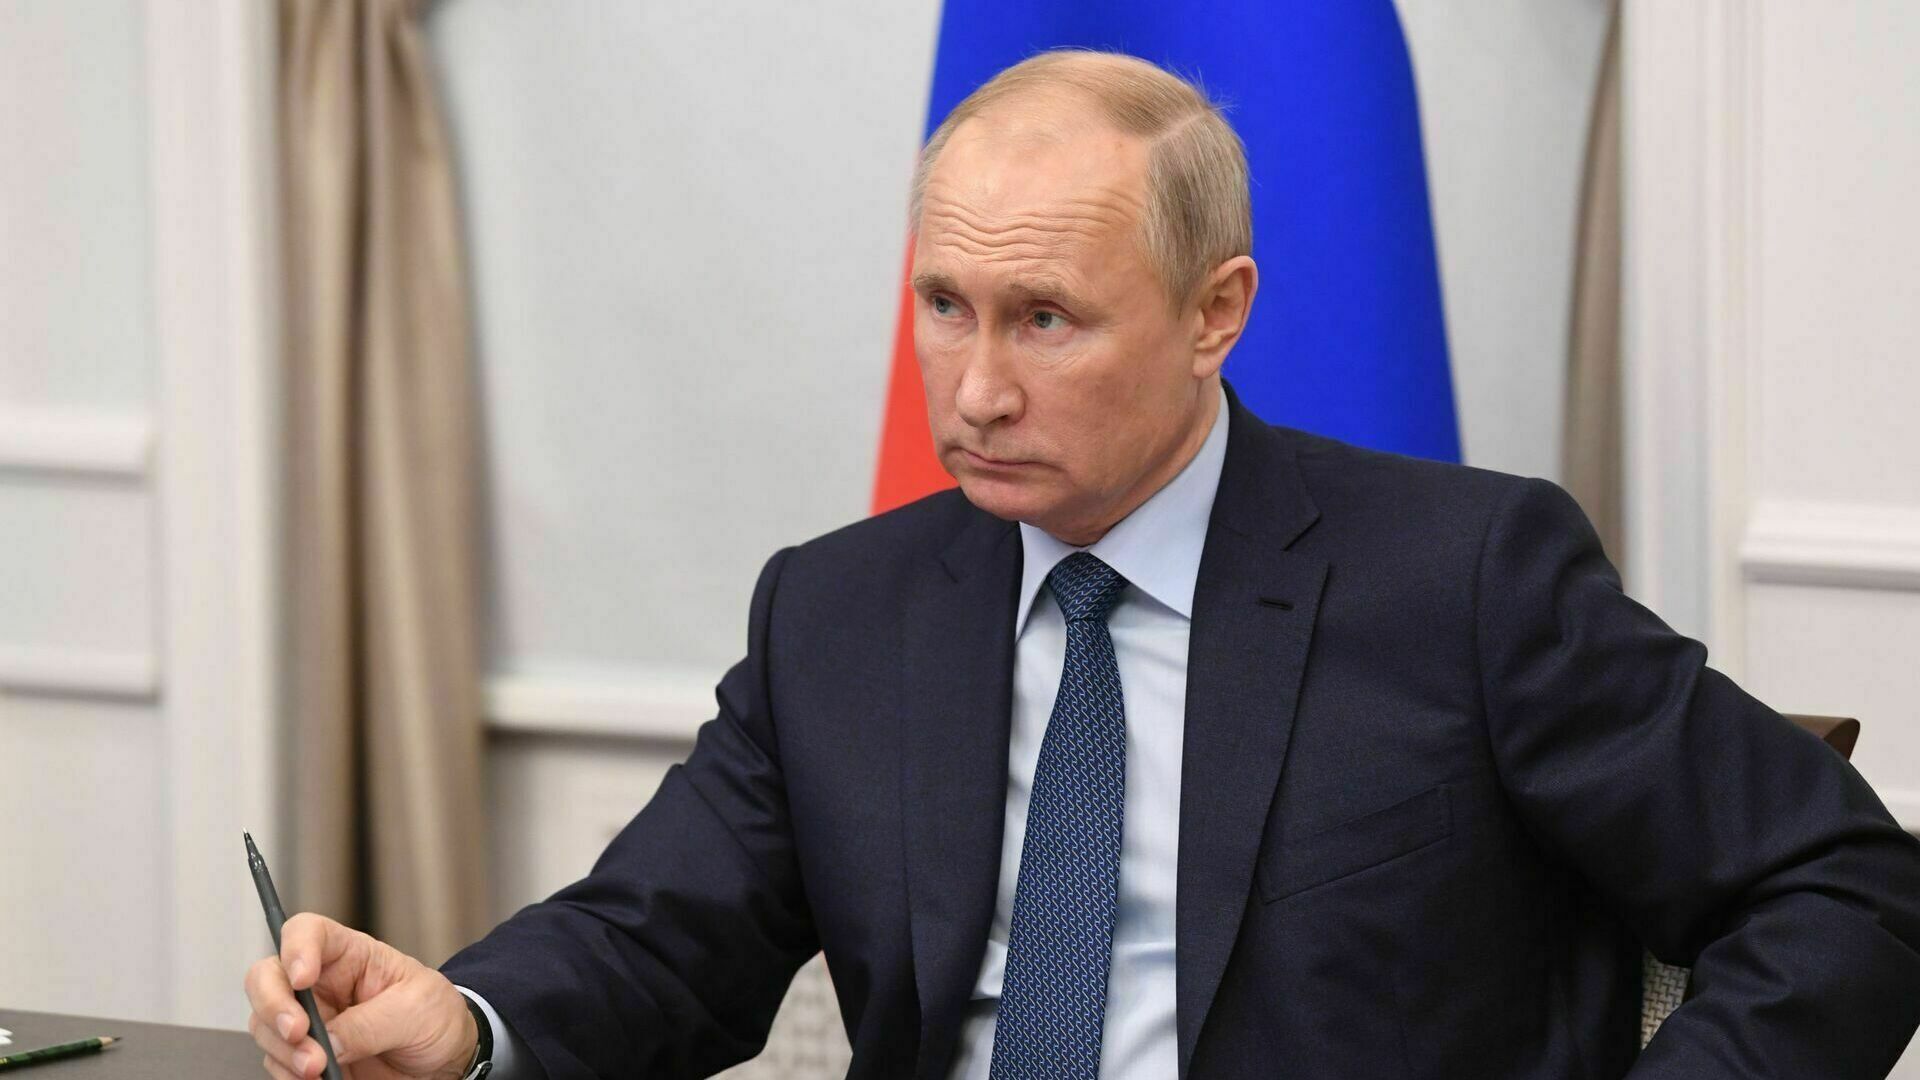 Vladimir Putin instructed to introduce a ceasefire regime from January 6 to January 7, 2023